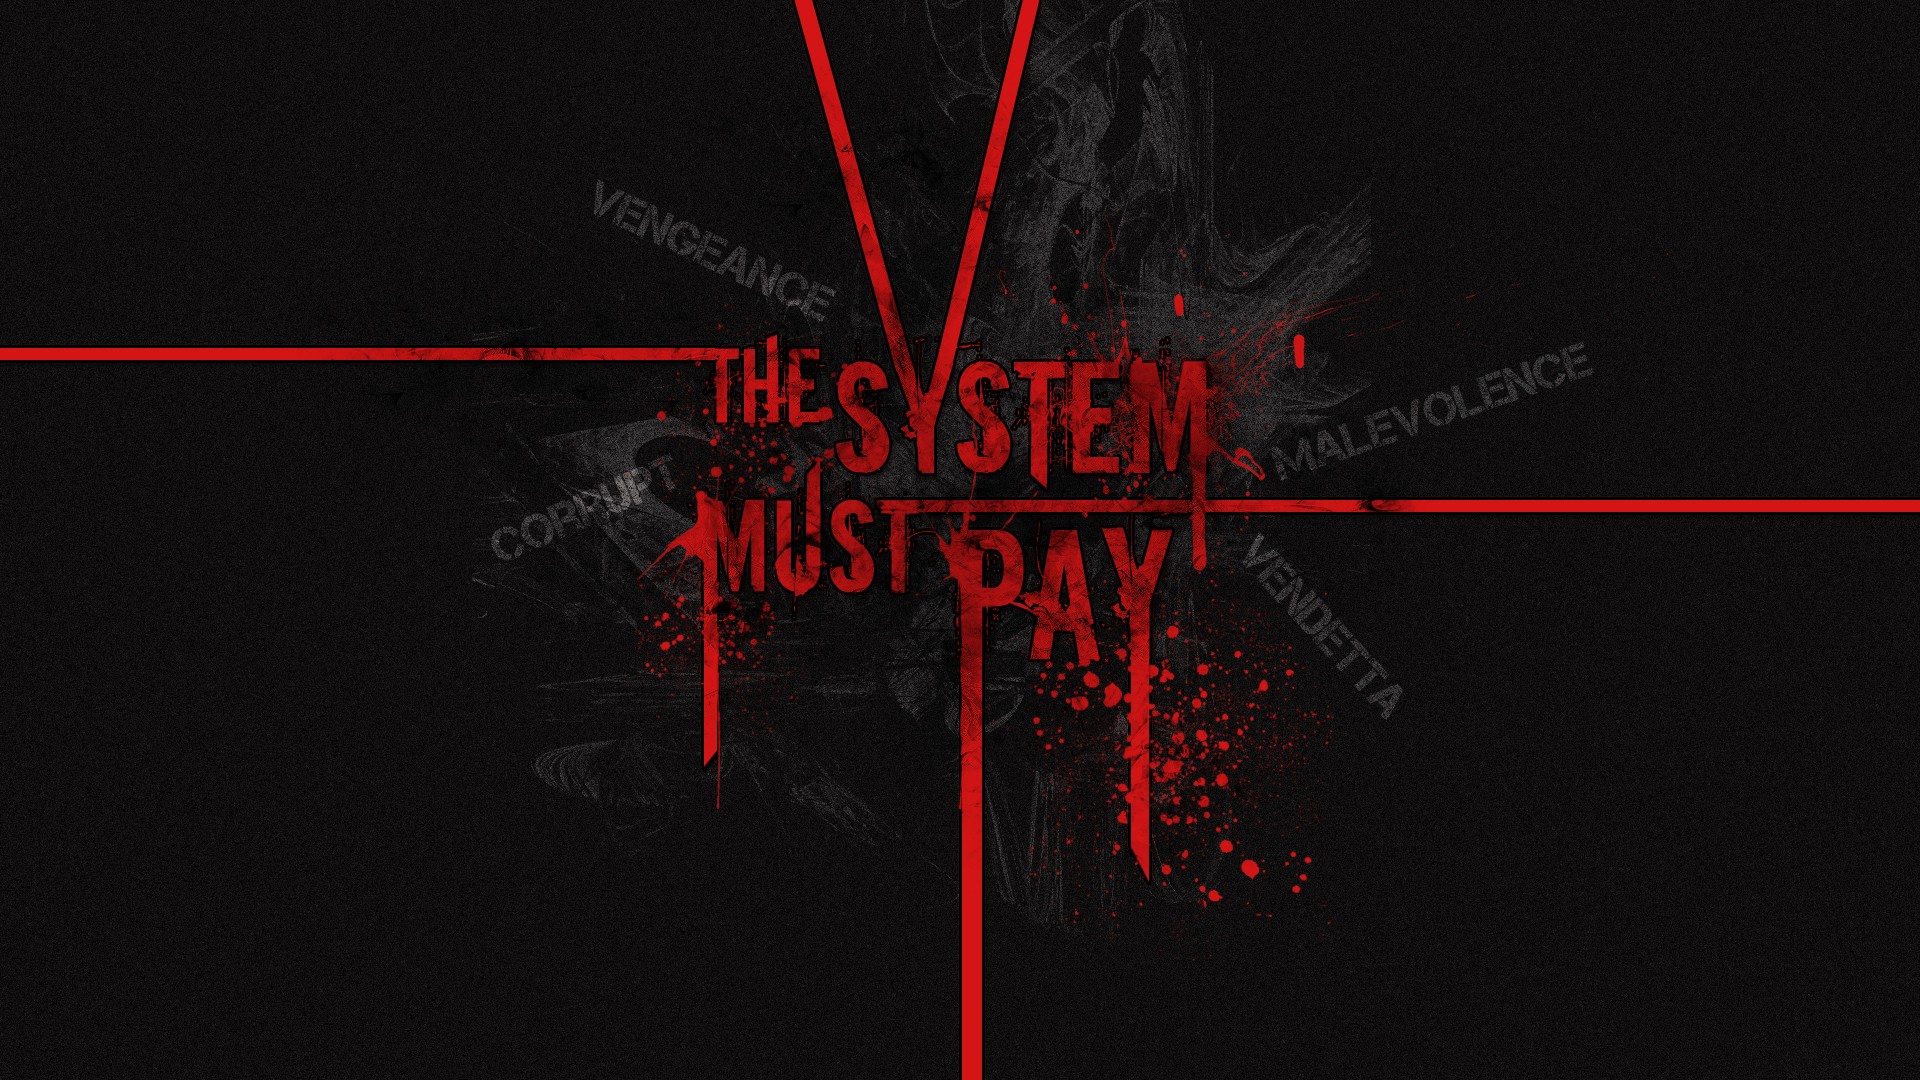 Wallpaper Typography - The system must pay